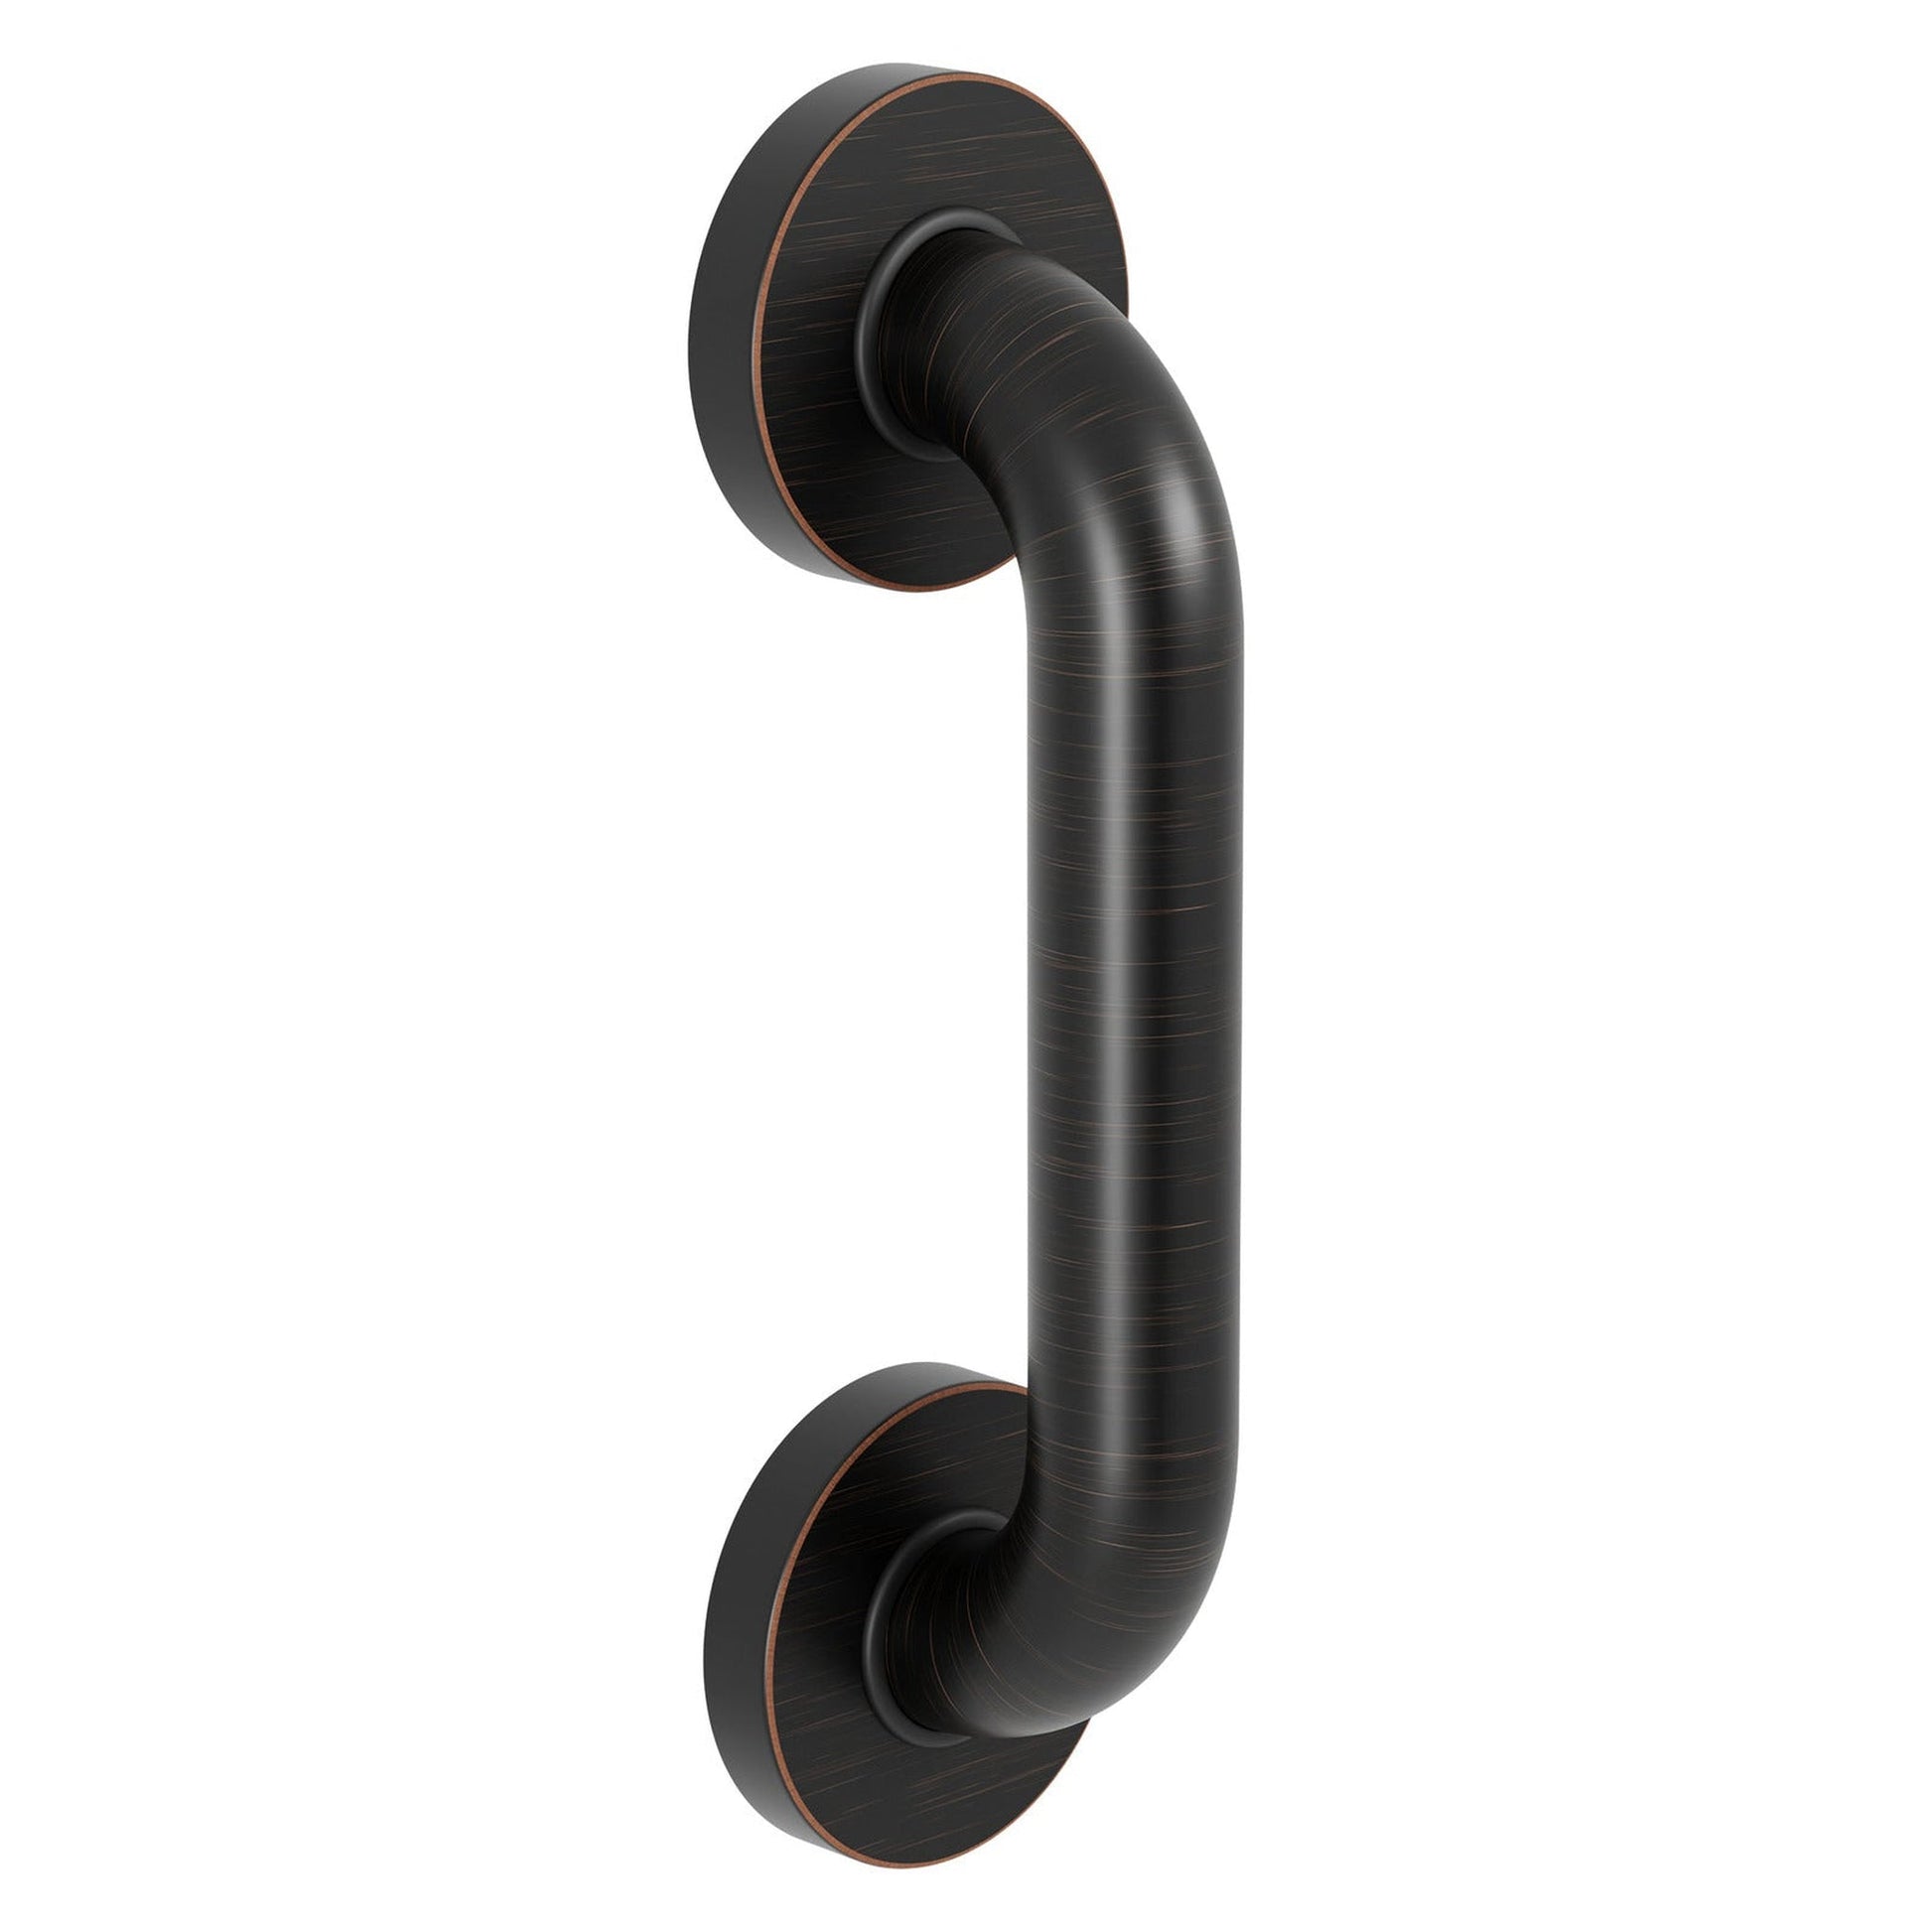 Evekare 8" x 1.25" Stainless Steel Concealed Mount Grab Bar in Oil Rubbed Bronze